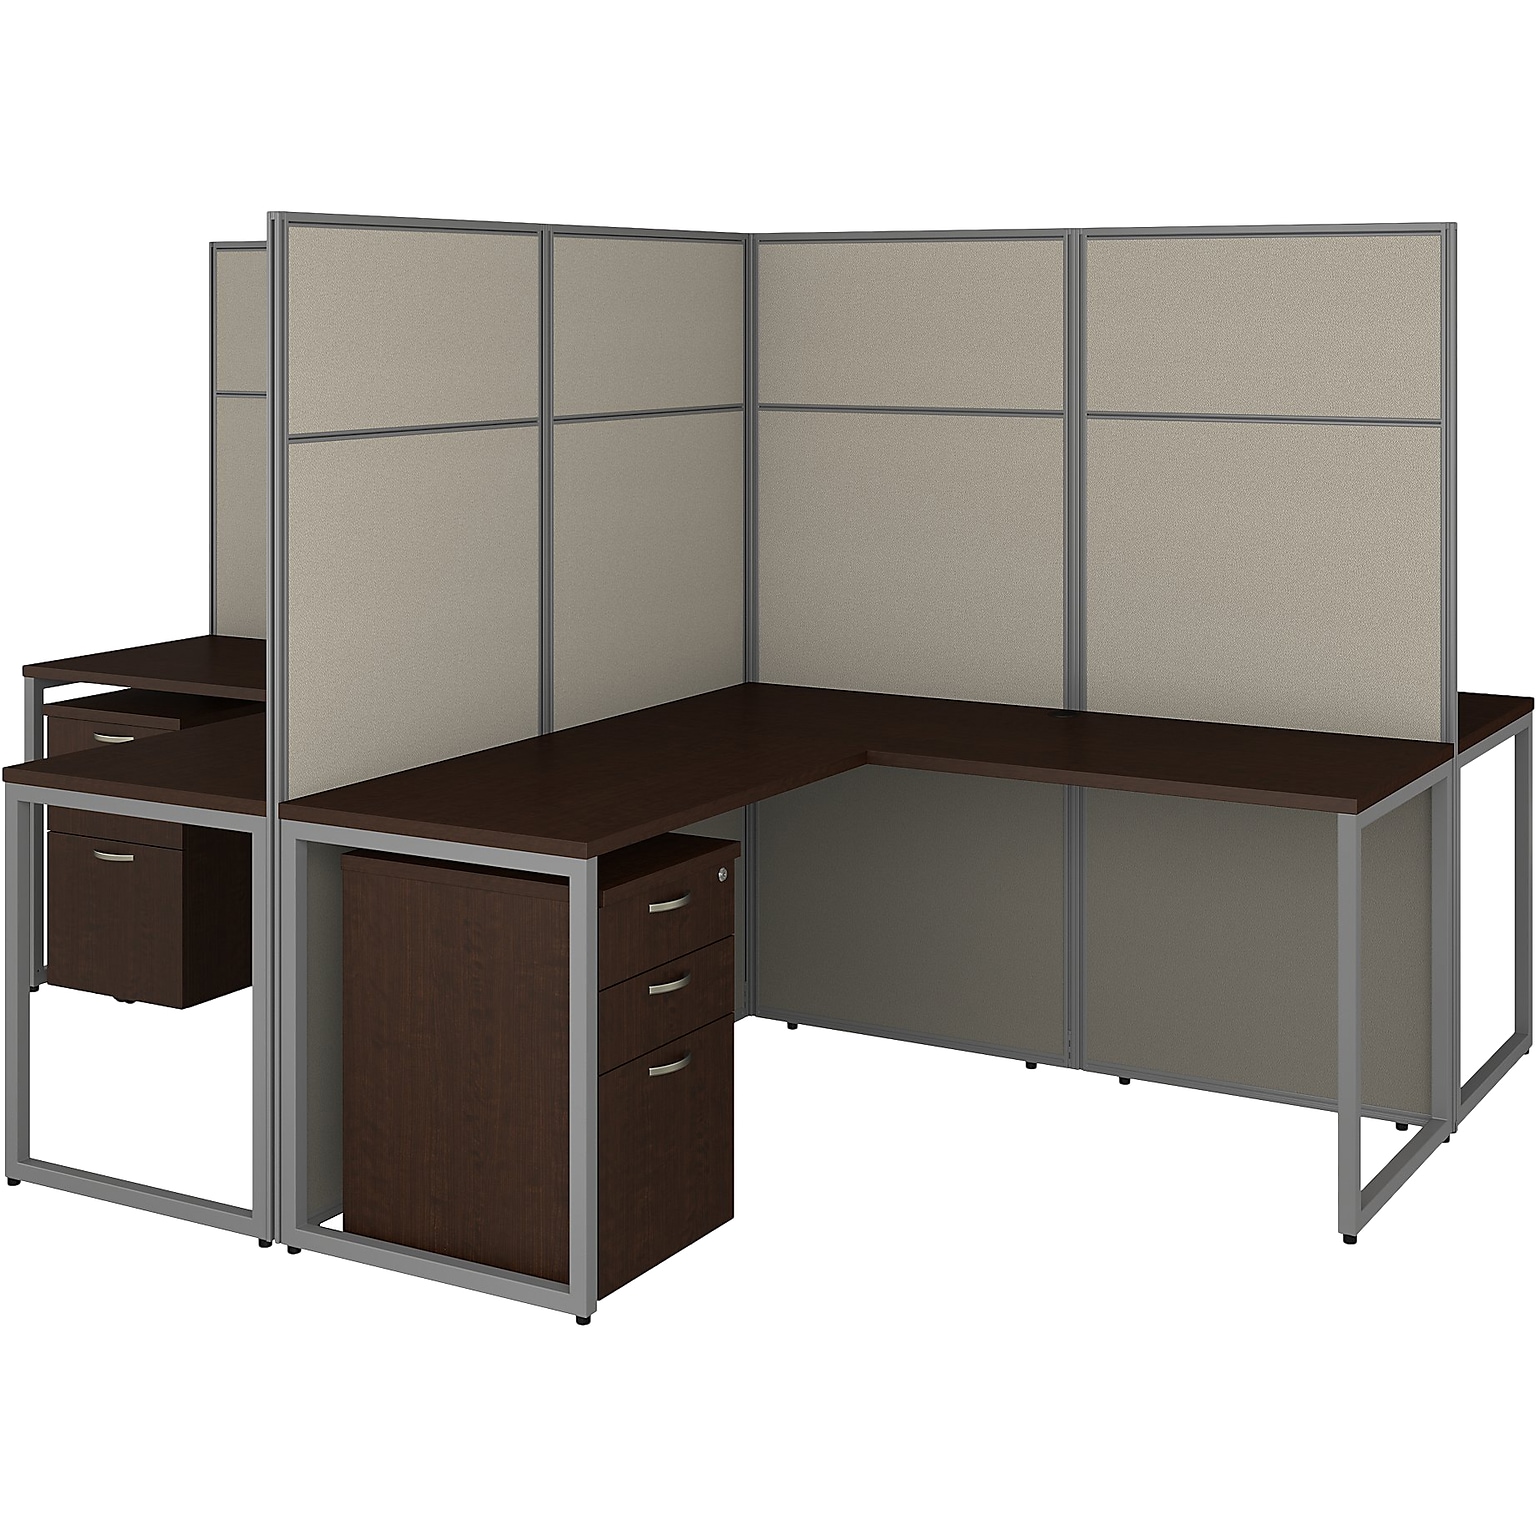 Bush Business Furniture Easy Office 66.34H x 119W 4 Person T-Shaped Cubicle Panel Workstation, Mocha Cherry (EODH76SMR-03K)